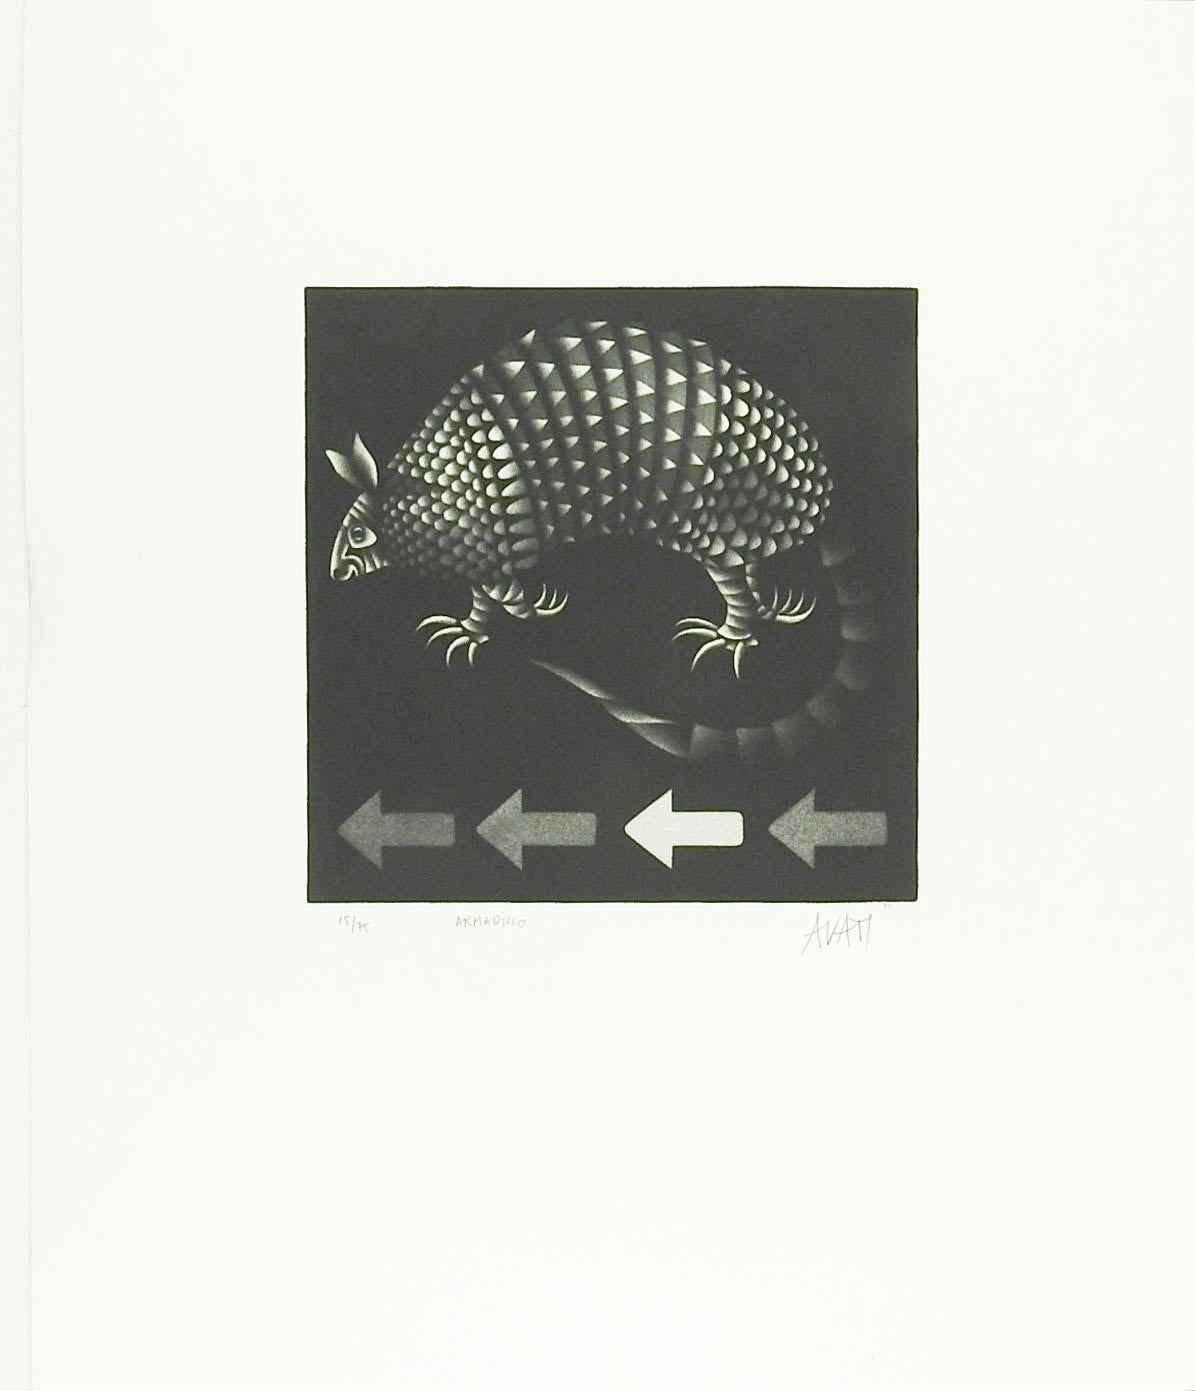 Circa 1960's Mezzotint on paper by Mario Avati (1921-2009) France.  Signed, numbered 15/75 and titled Armadillo in pencil along lower margin.  Unframed, image size 8.5